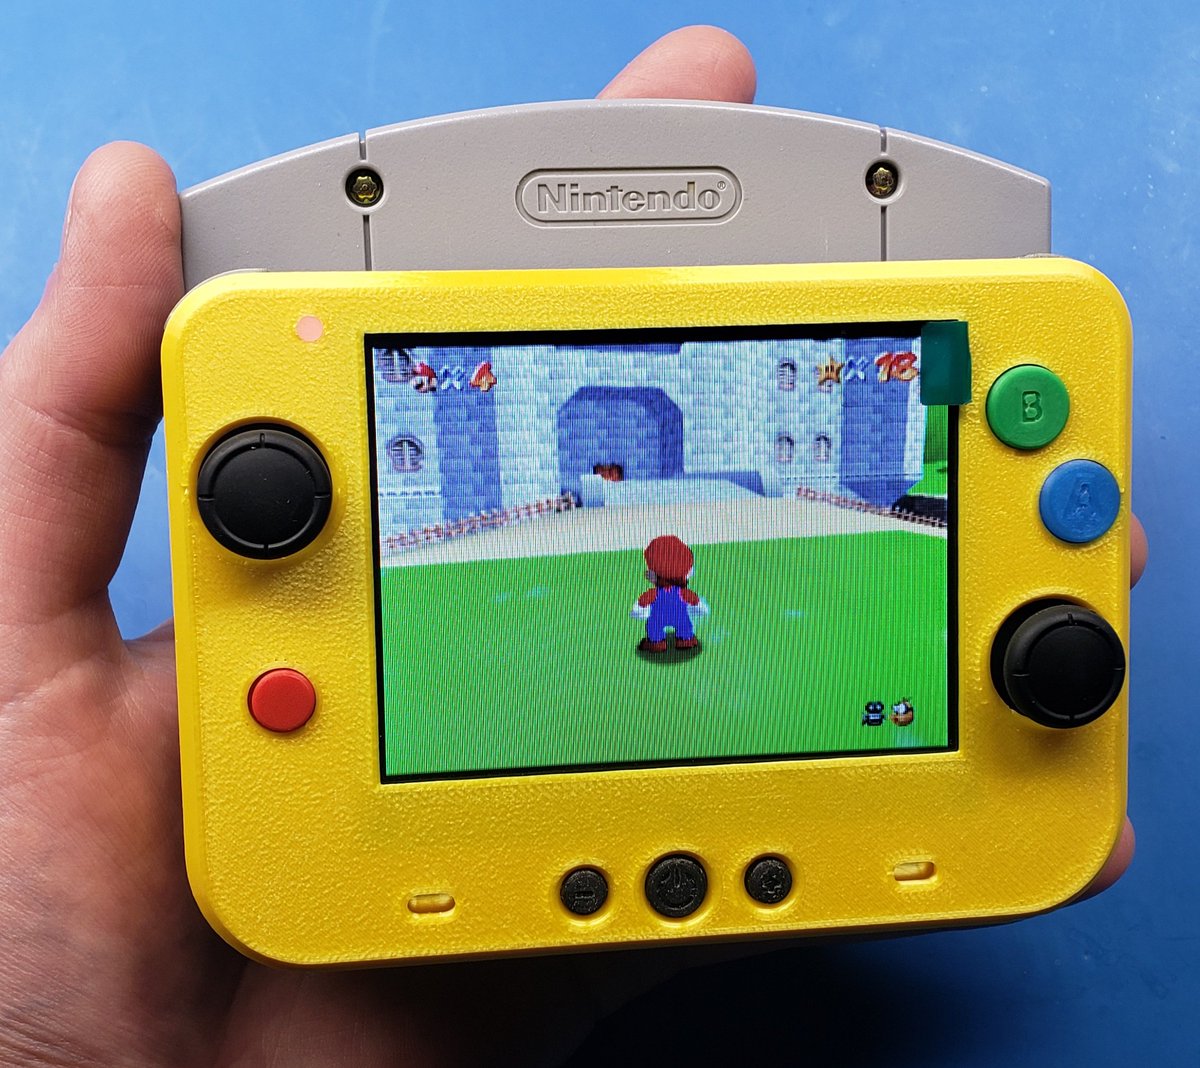 I have finally fulfilled my destiny of building the world's smallest N64 portable